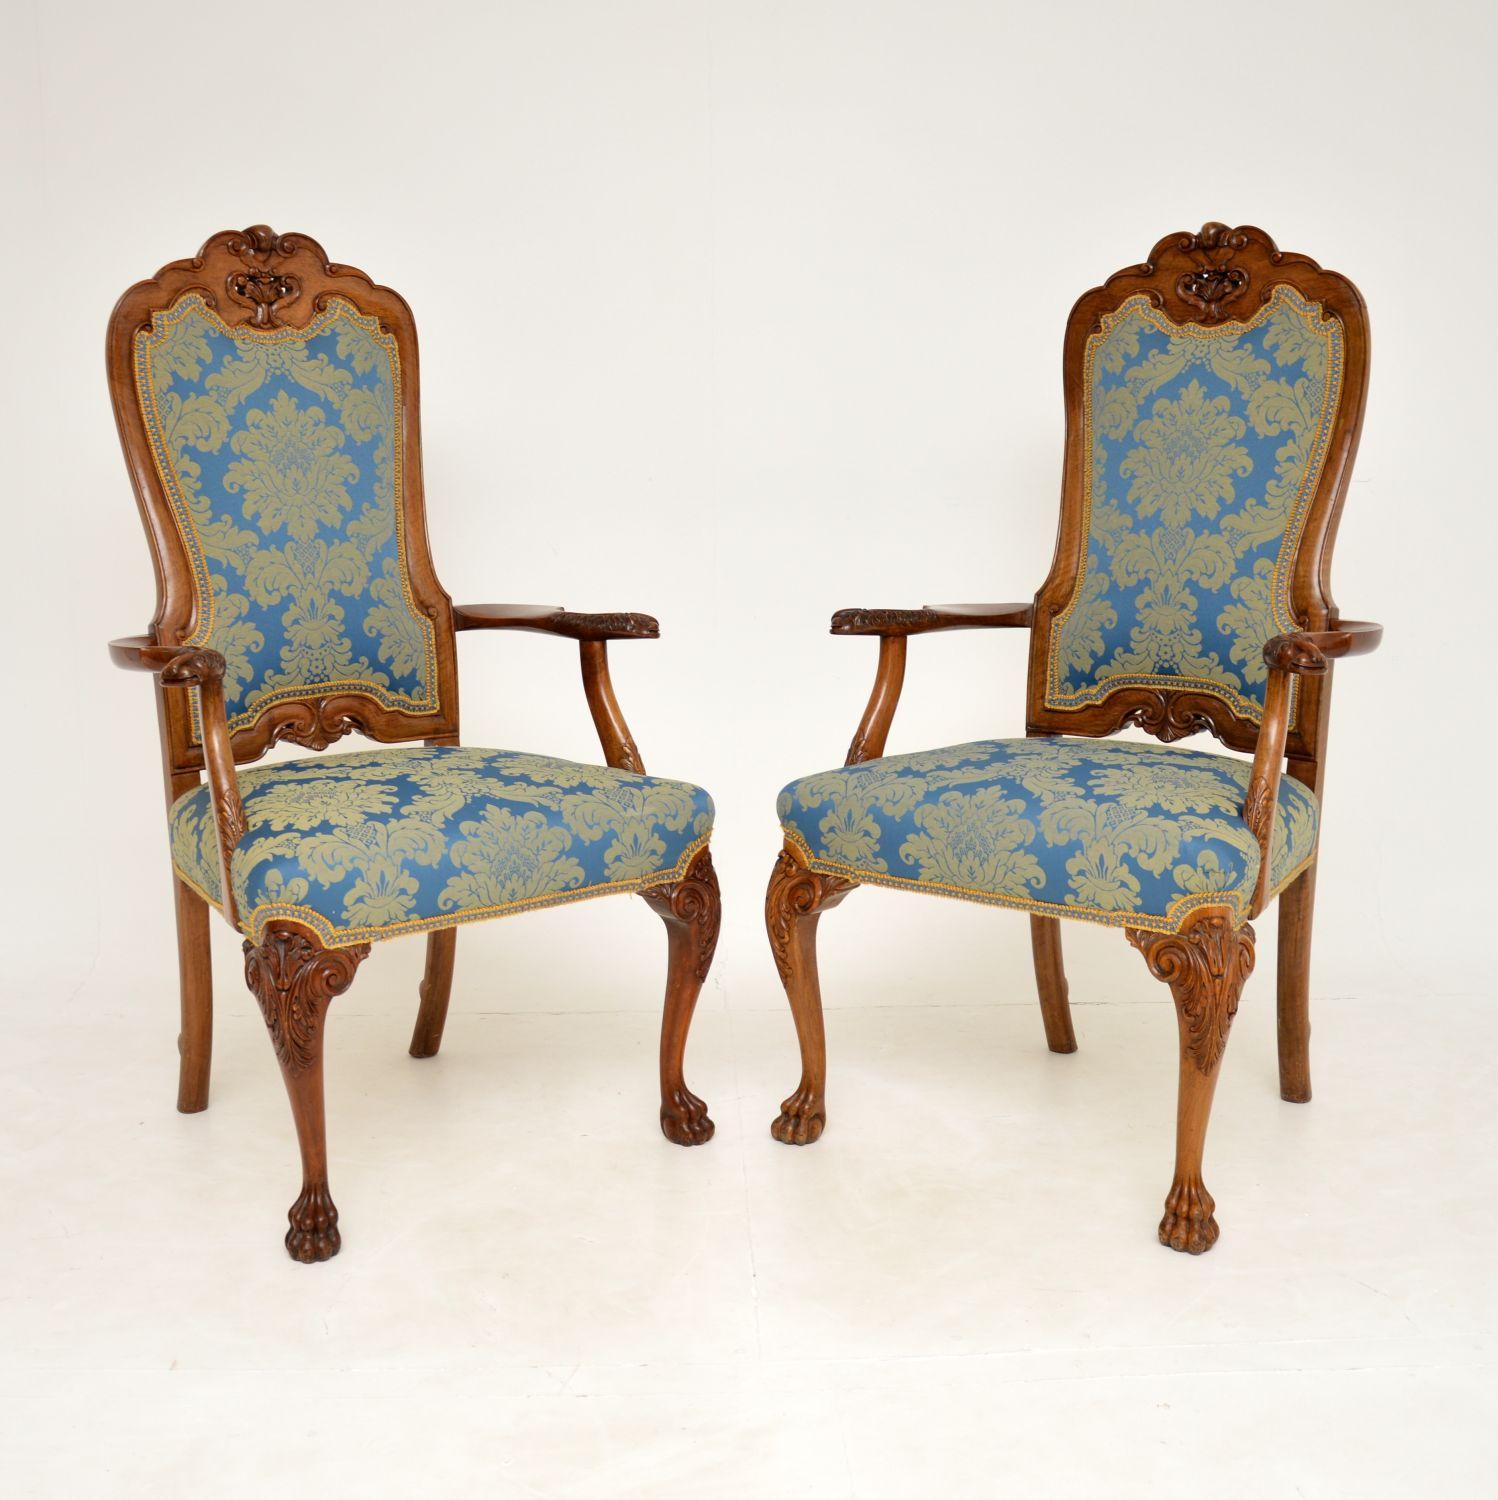 A stunning pair of antique high back carver armchairs in the Queen Anne style. These were made in England, they date from around the 1920’s.

They are of absolutely wonderful quality, they are beautifully designed and extremely elegant. The solid